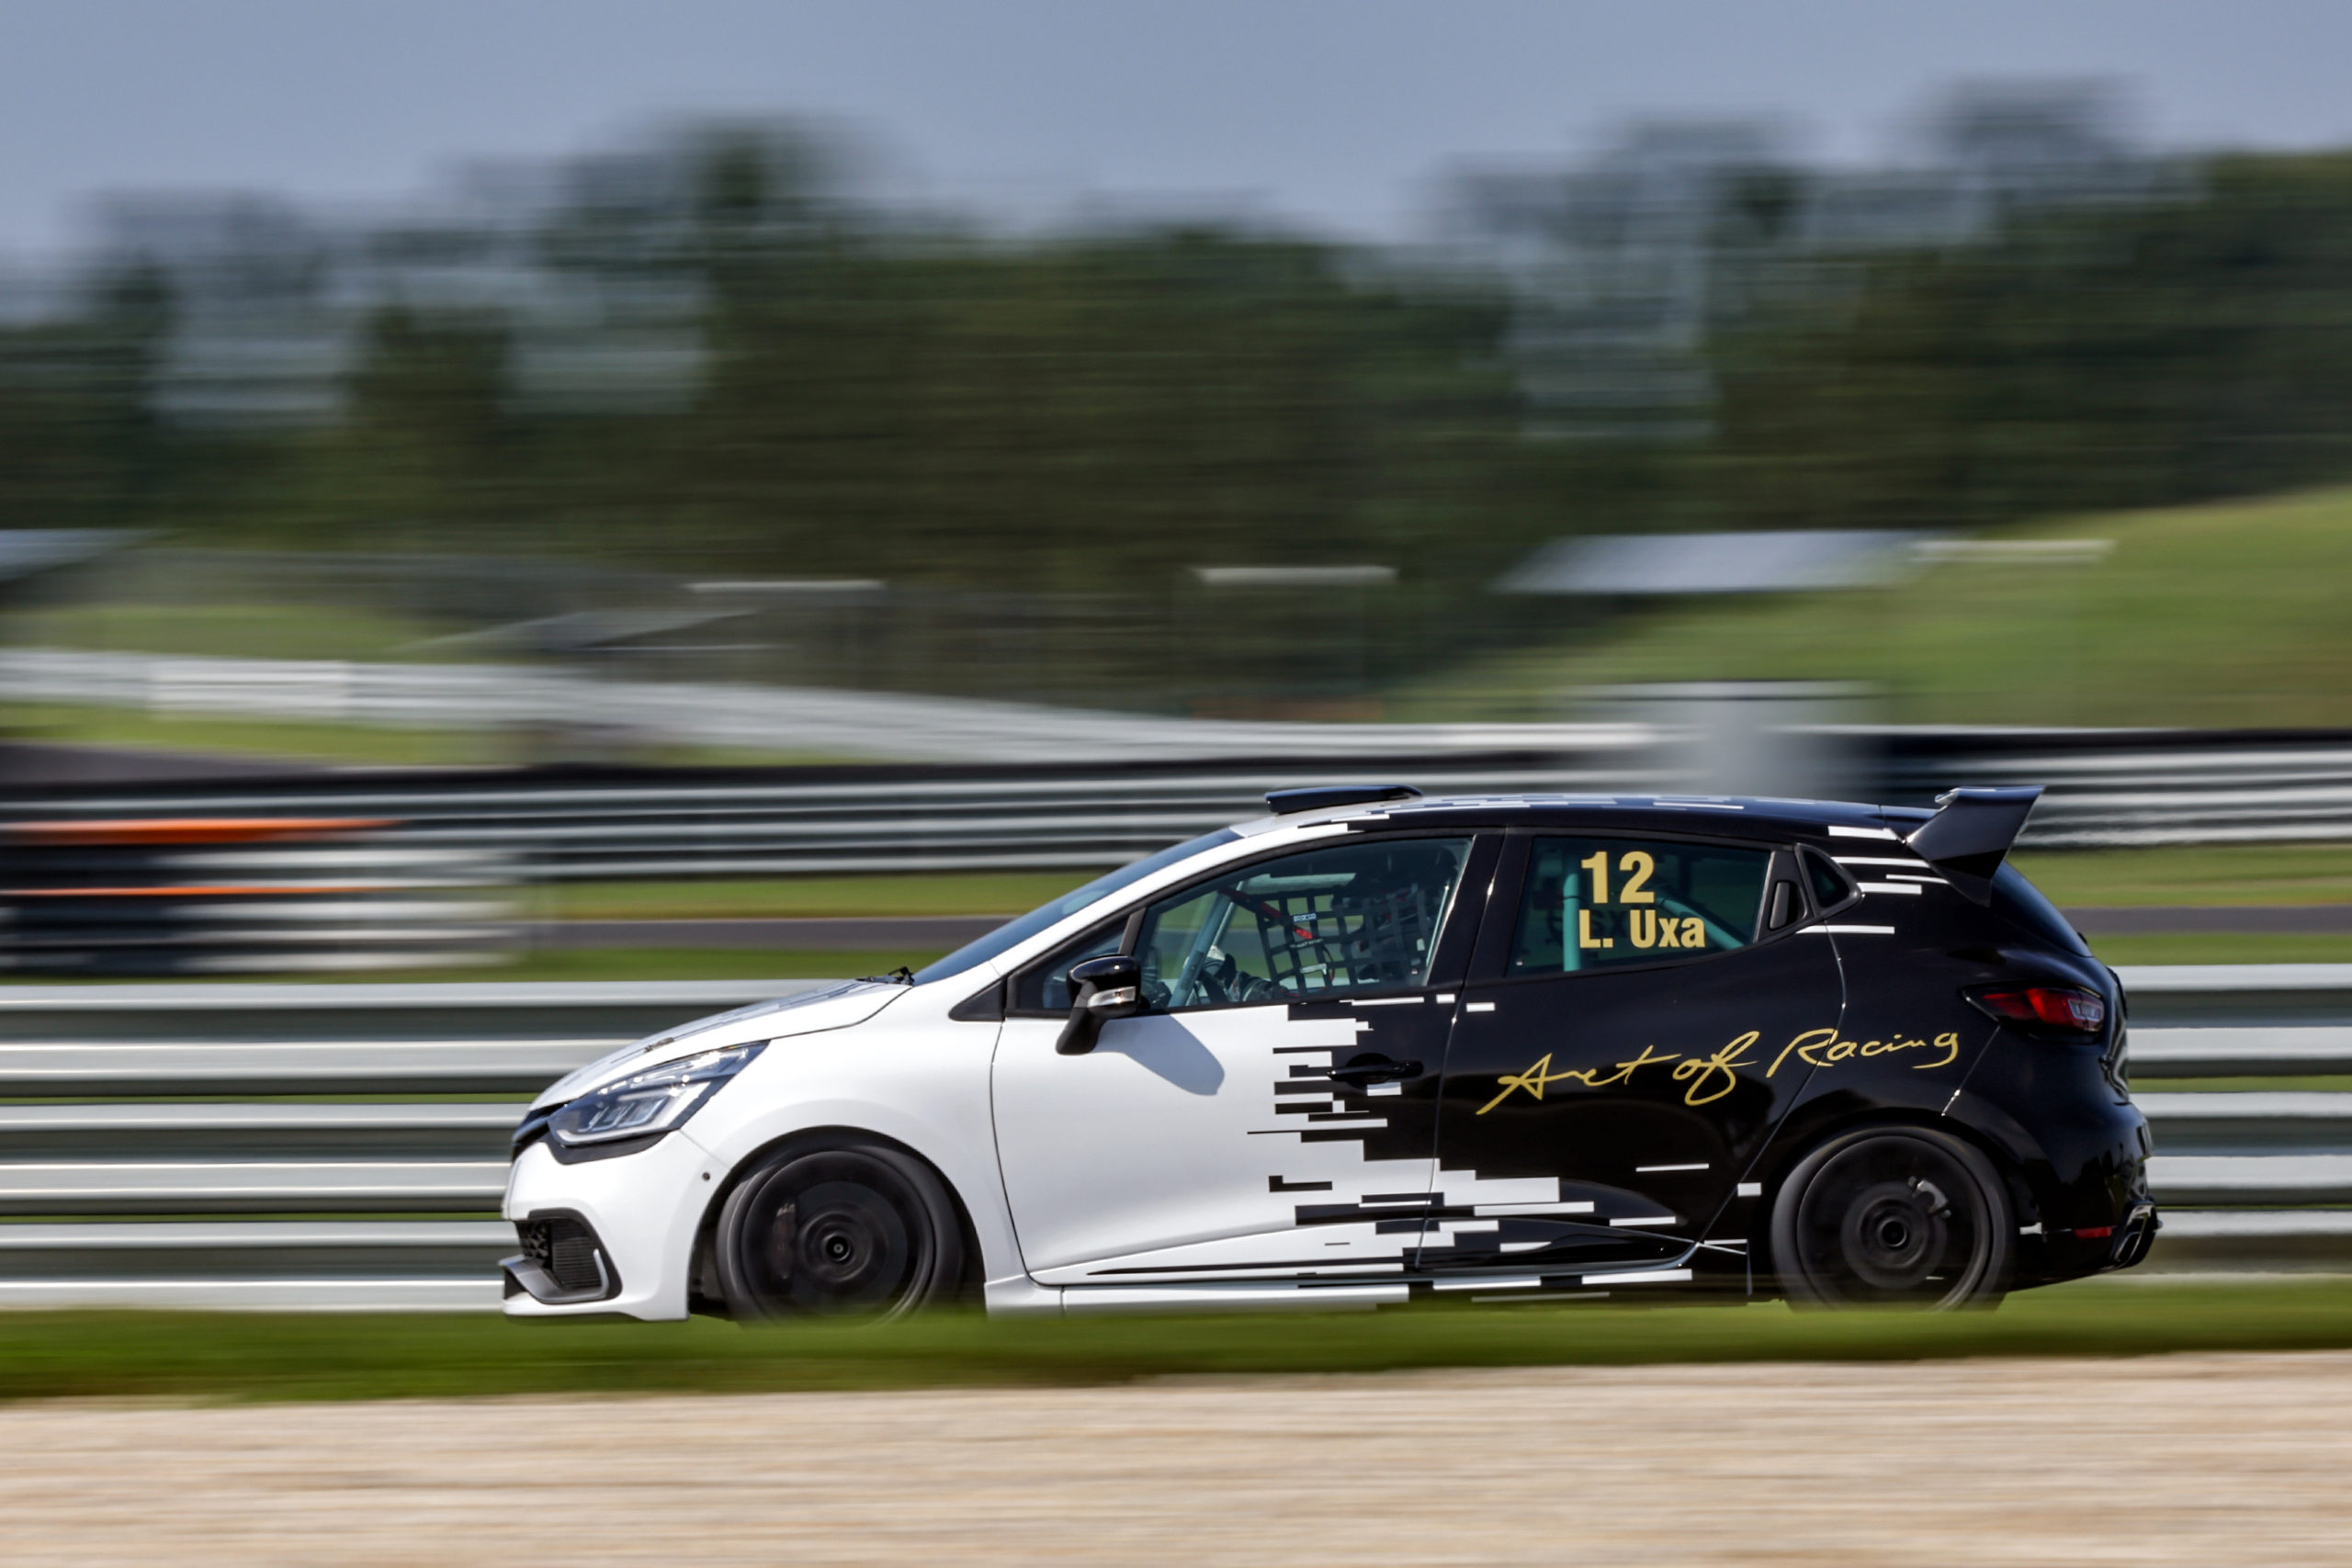 Lukáš Uxa returns to the Clio Cup. He wants to have fun